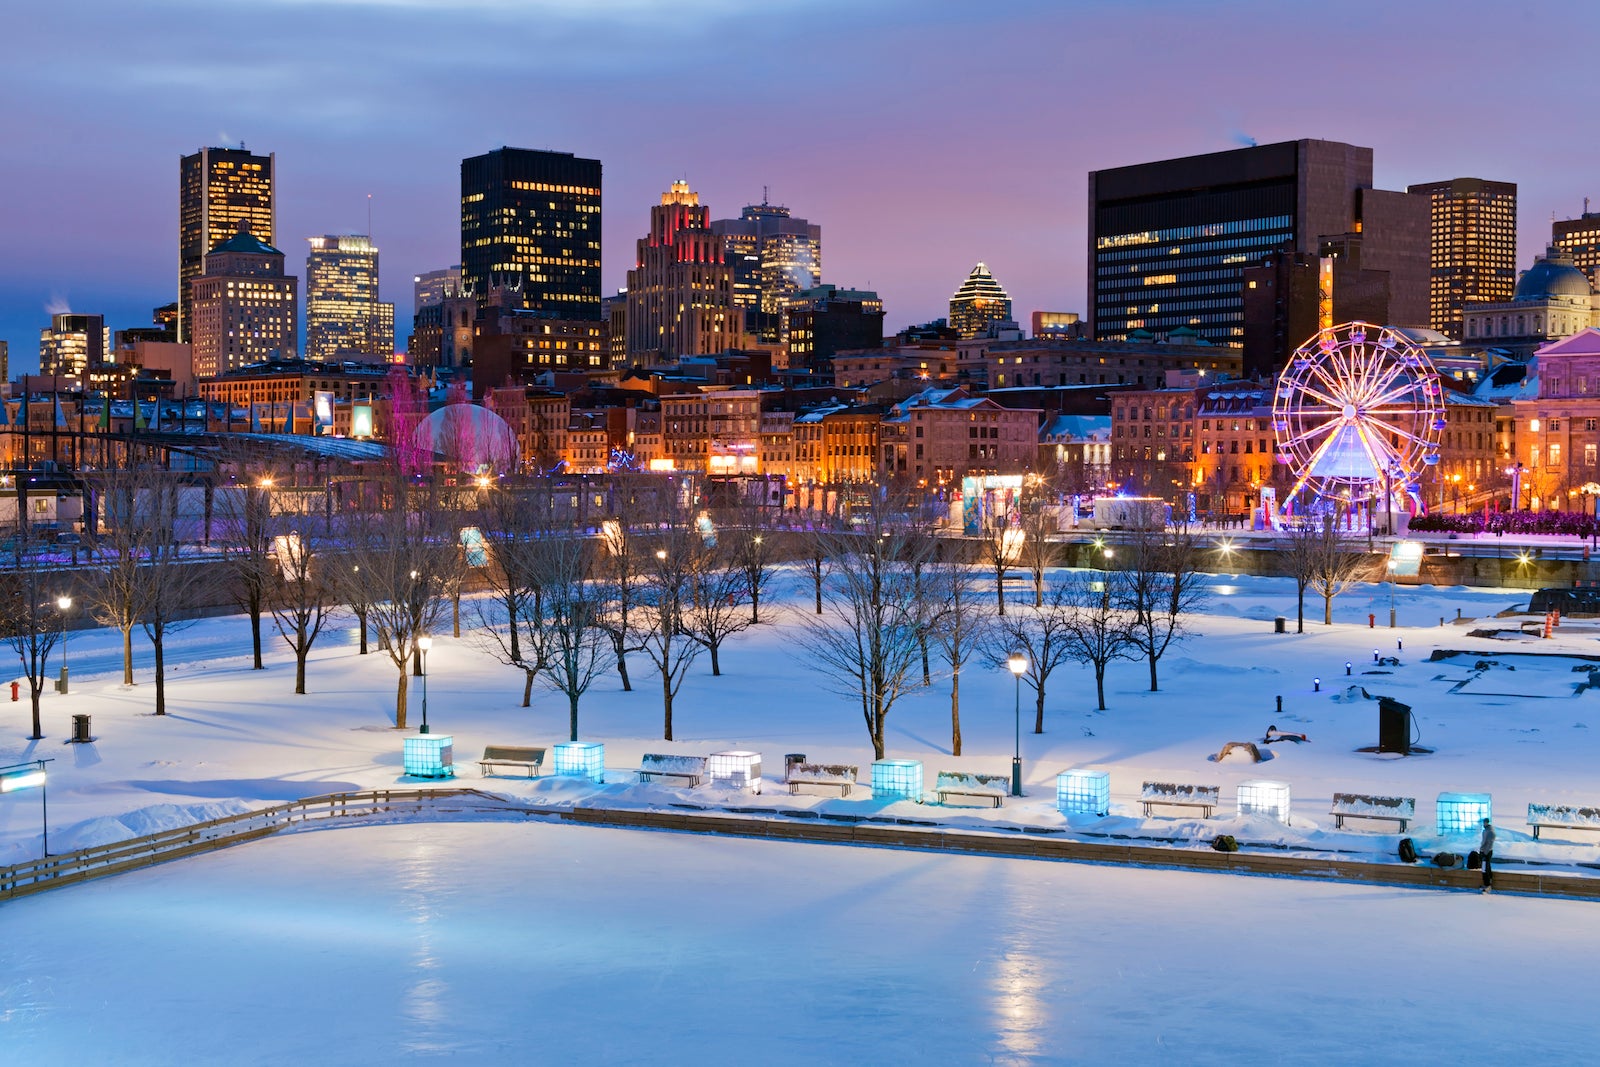 Canada, Quebec province, Montreal, the Old Port, ice rink, the Montreal High Lights Festival